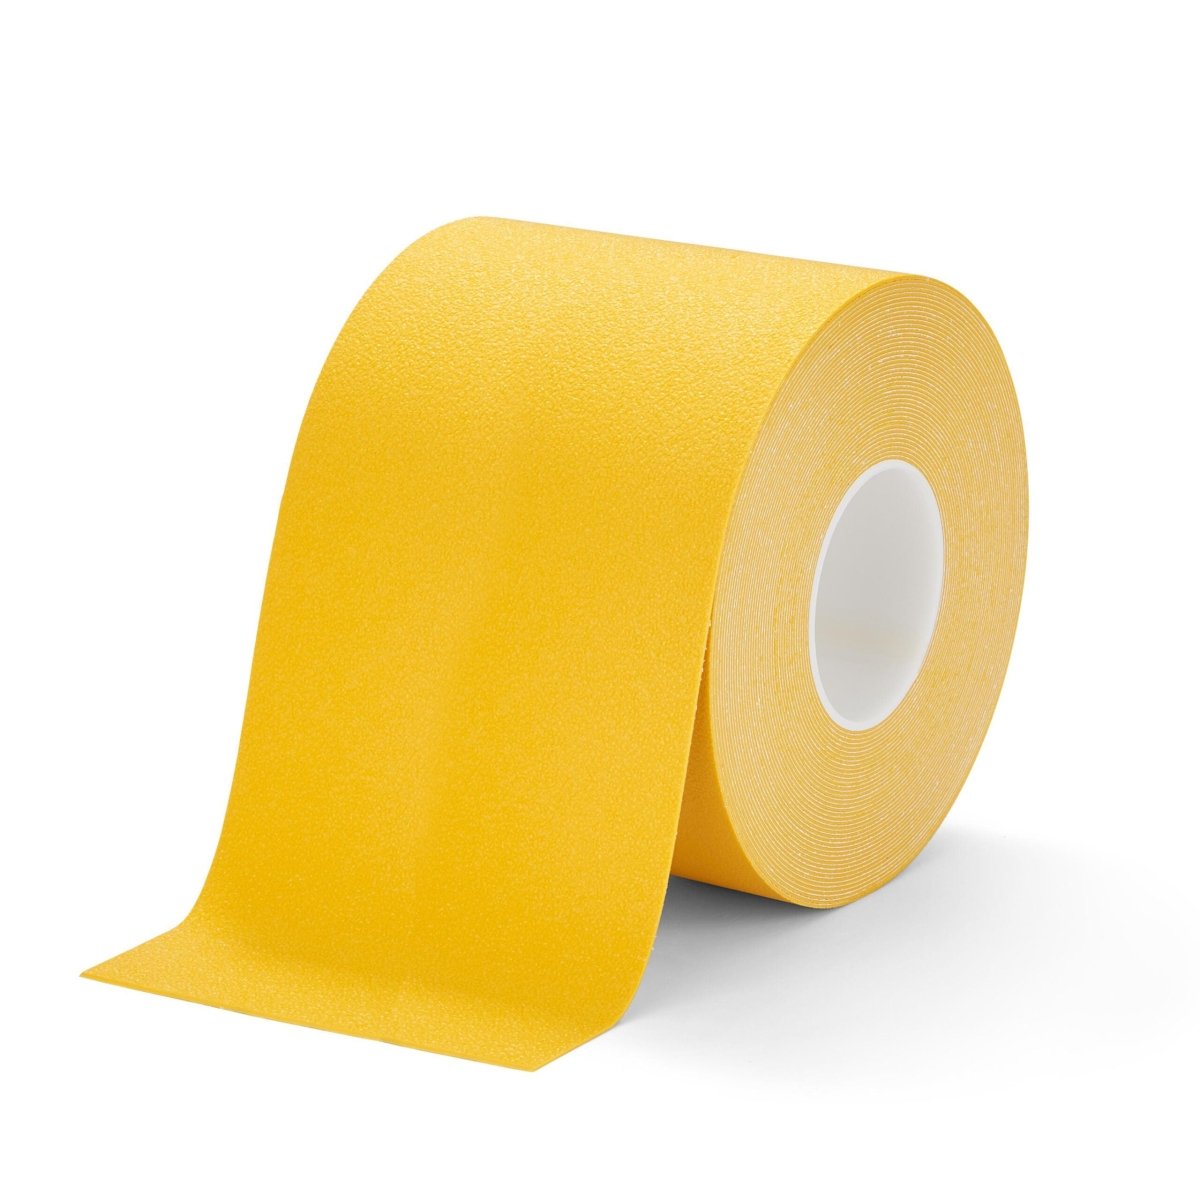 Resilient Soft Touch Textured "Rubber Feel" Anti-Slip Tape - Slips Away - H3408Y-Yellow-Resilient-150mm -